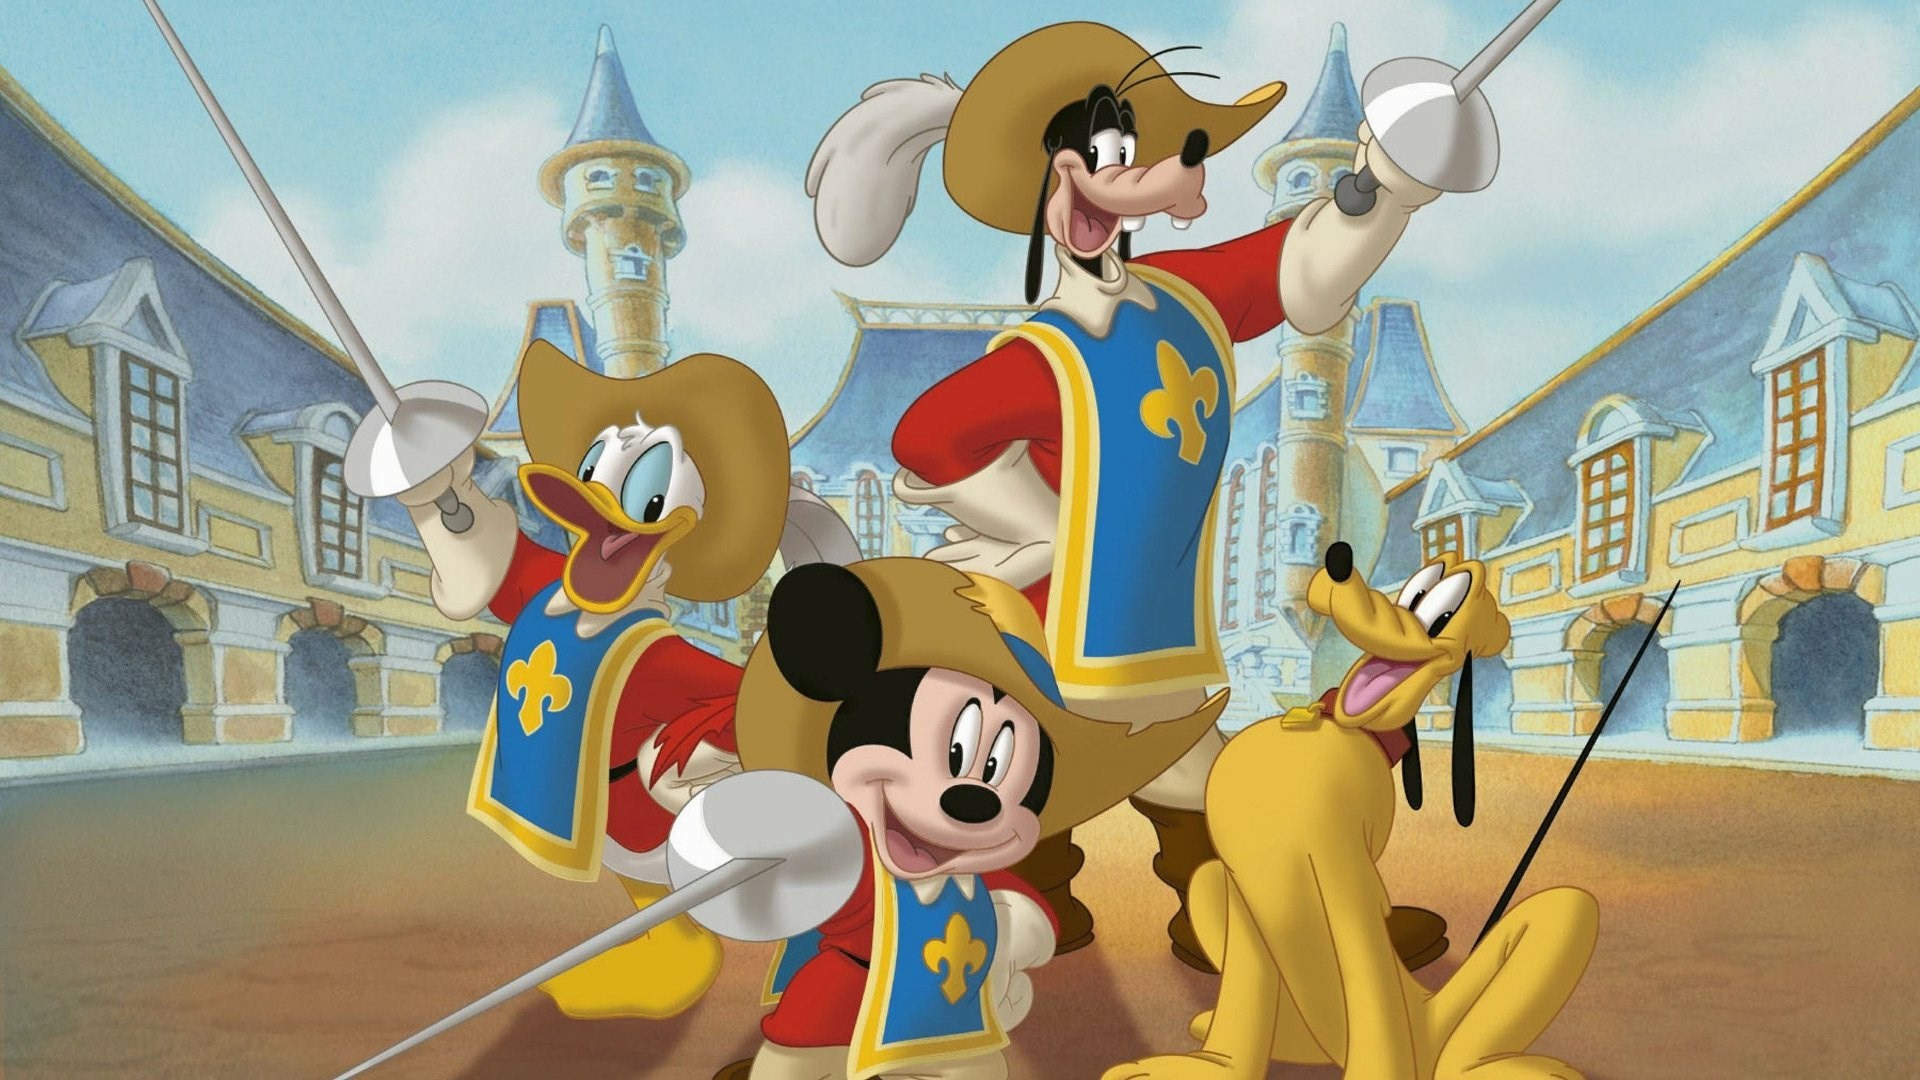 1920x1080 widescreen wallpaper mickey donald goofy the three musketeers, 351 kB -  Slade Bishop